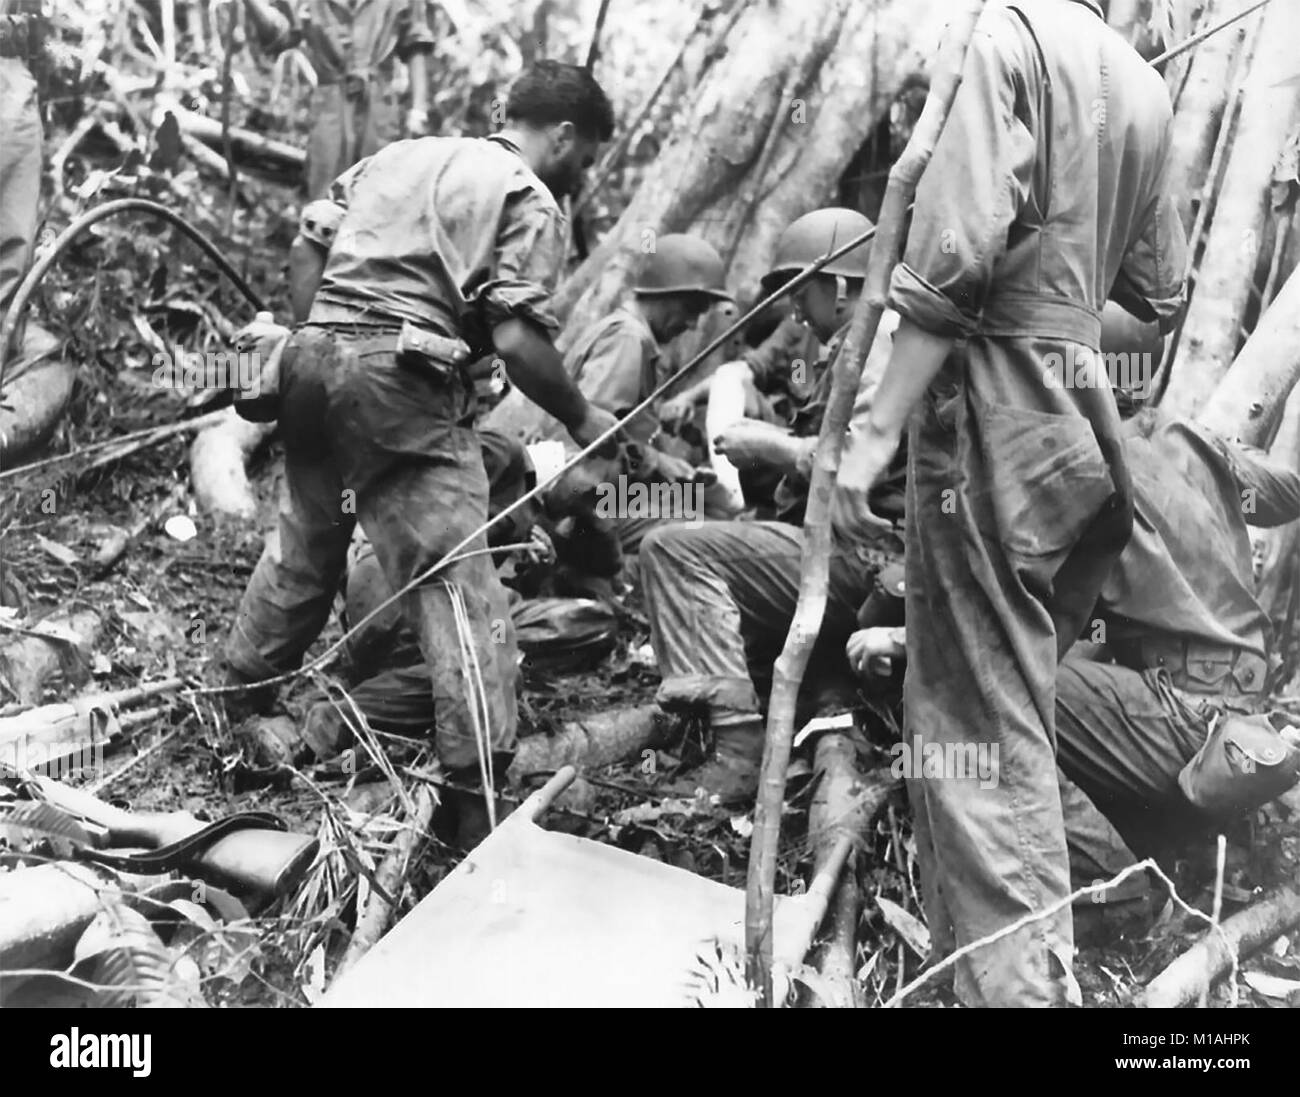 Litter bearers give first aid to two men wounded by grenades while on patrol on Guadalcanal. Even when under direct fire of the enemy the bearers continue to care for and carry out the wounded. They are commanded by Major General Alexander M. Patch, Jr. 25th Medical BN., 25th Division. 10 January 1945 Stock Photo